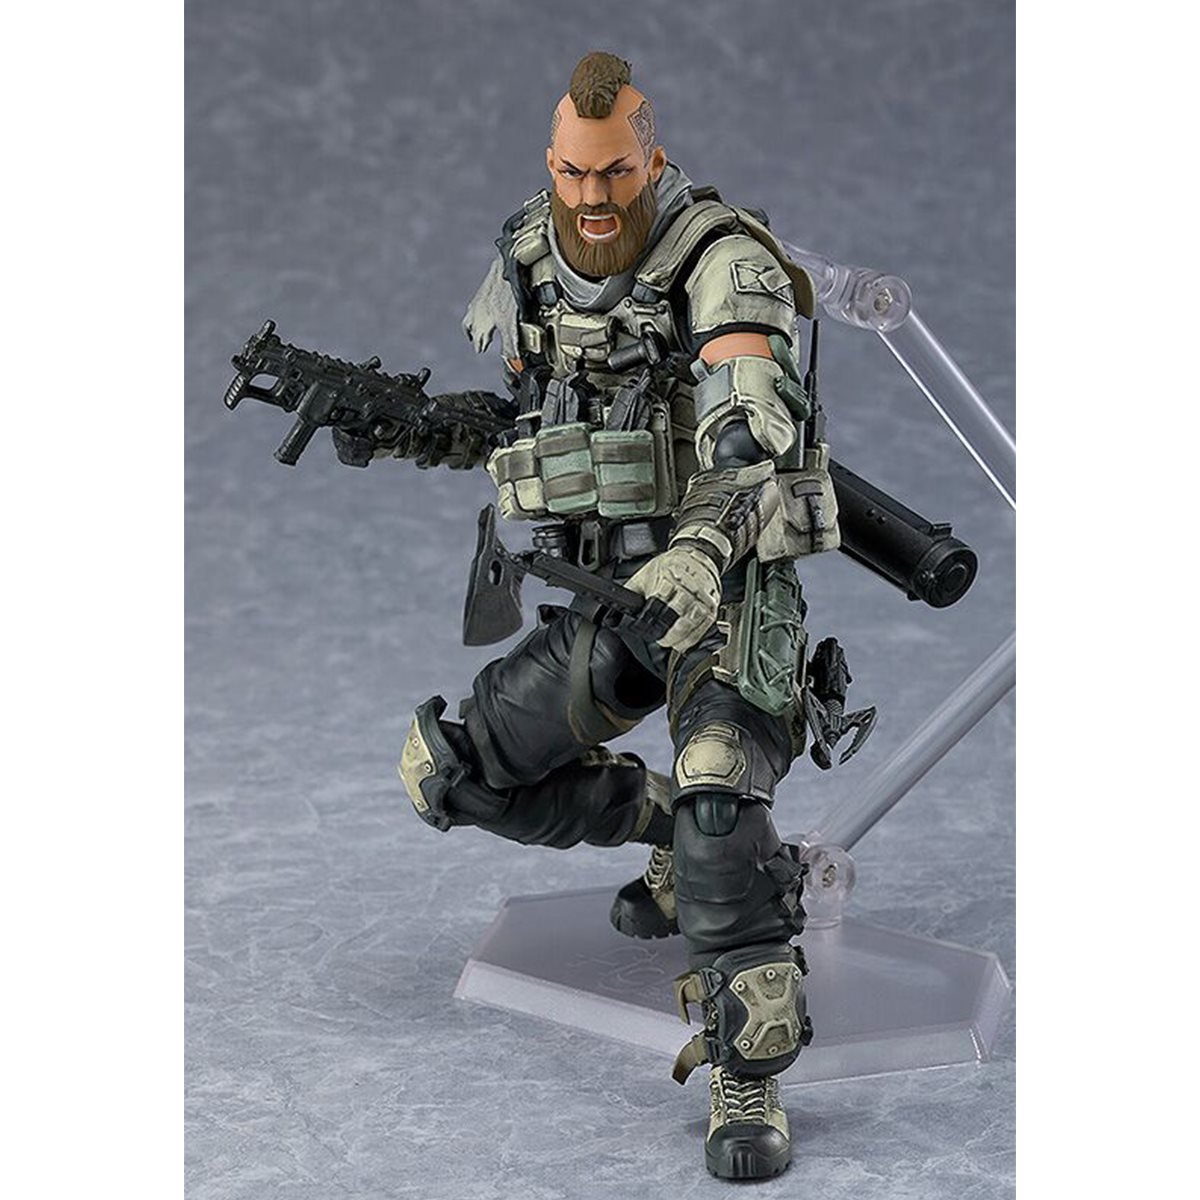 Call Of Duty: Black Ops 4 Ruin Figma Action Figure